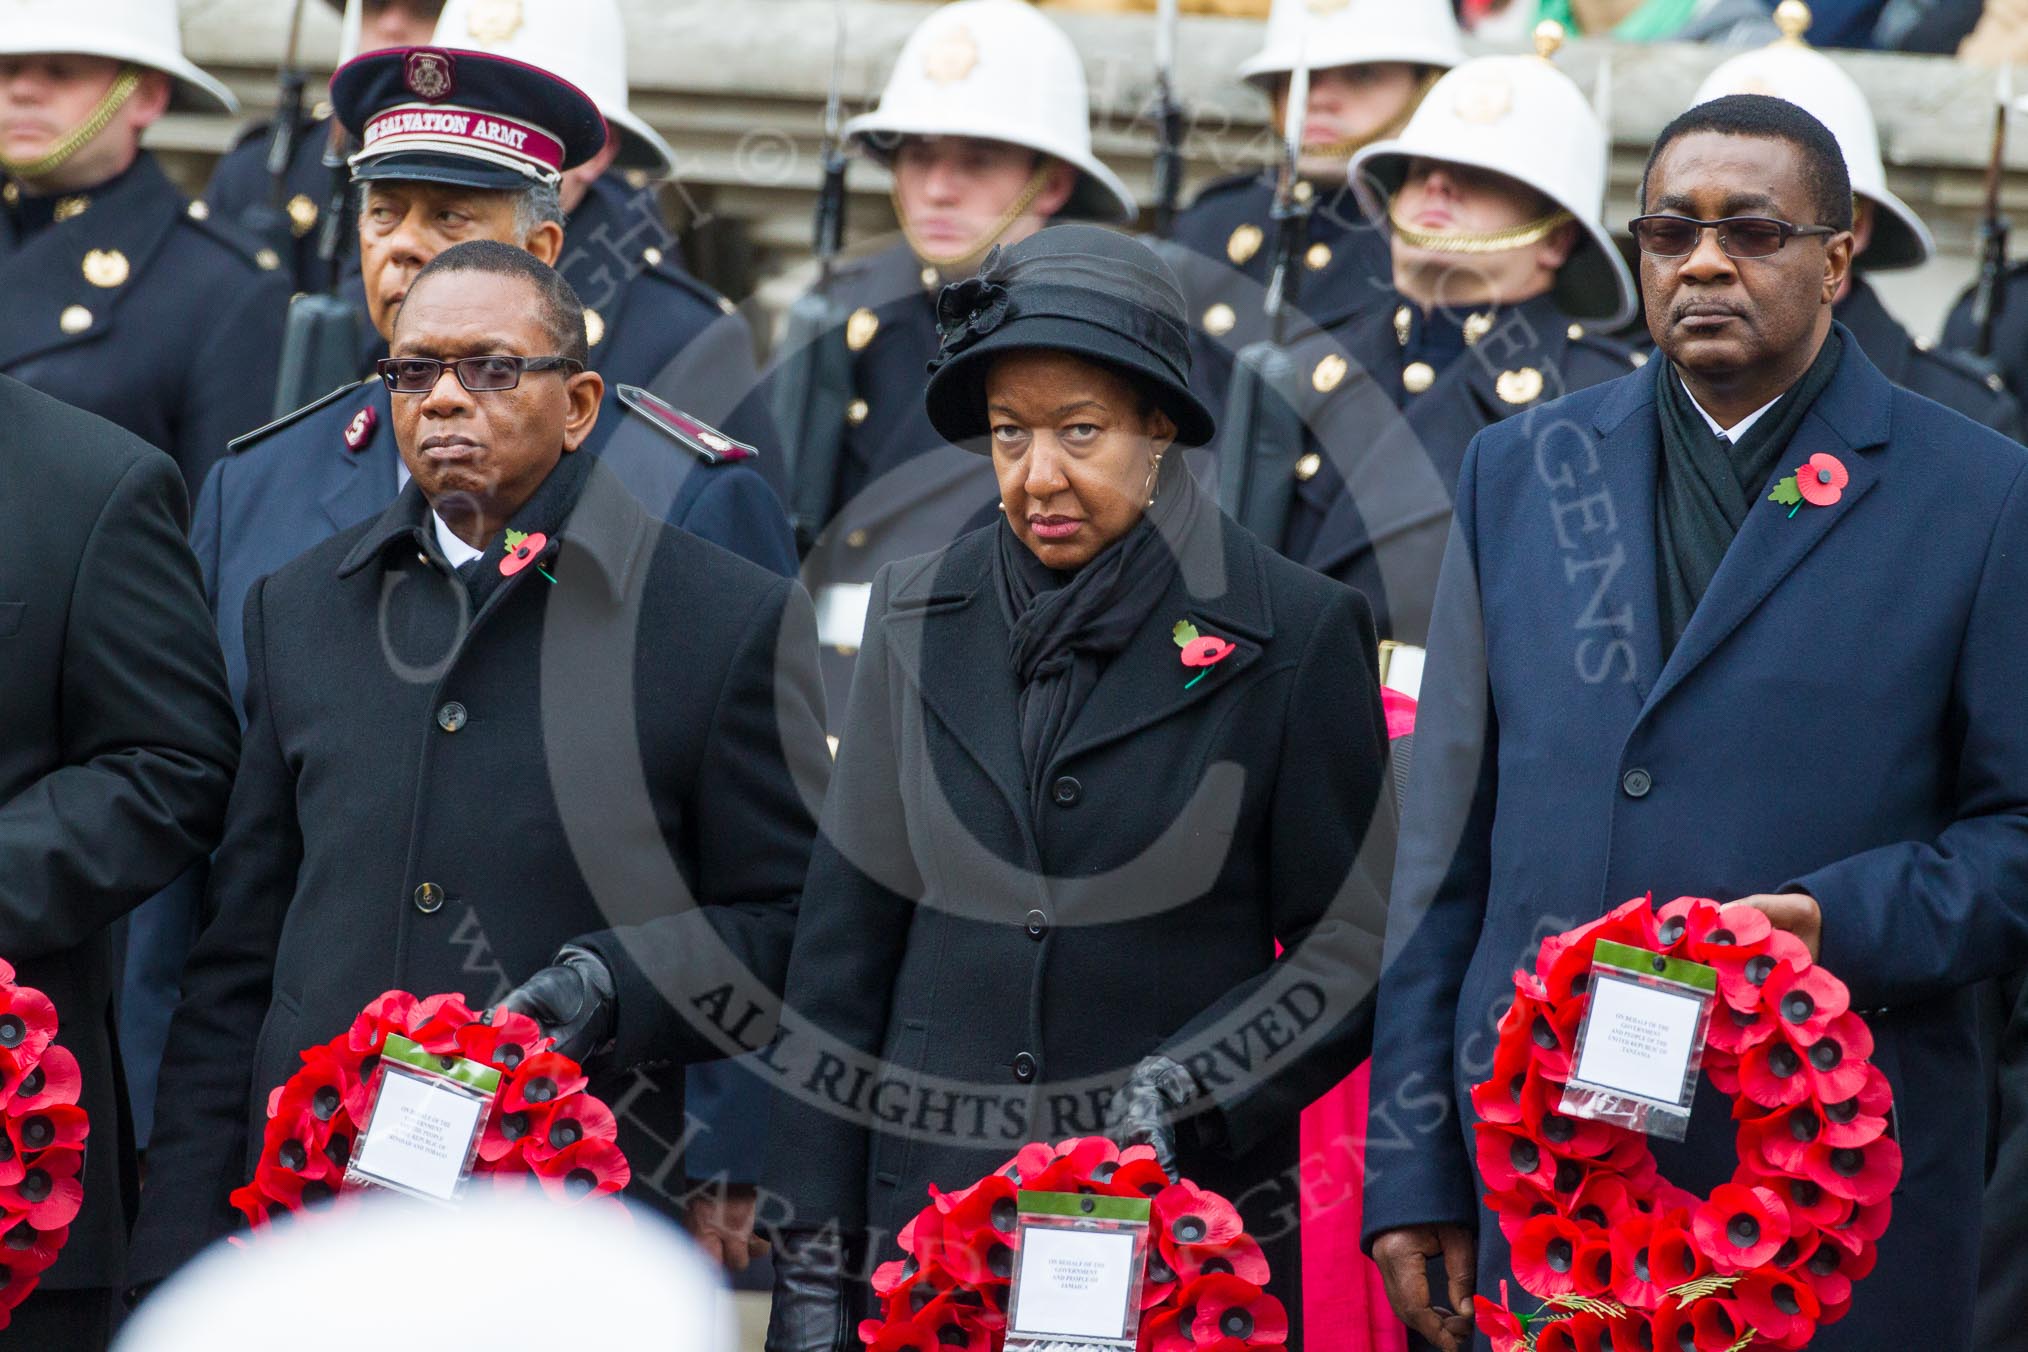 Remembrance Sunday at the Cenotaph in London 2014: The Acting High Commissioner of Trinidad and Tobago, the Counsellor of Jamaica, and the High Commissioner of Tanzania with their wreaths at the Cenotaph.
Press stand opposite the Foreign Office building, Whitehall, London SW1,
London,
Greater London,
United Kingdom,
on 09 November 2014 at 11:02, image #171